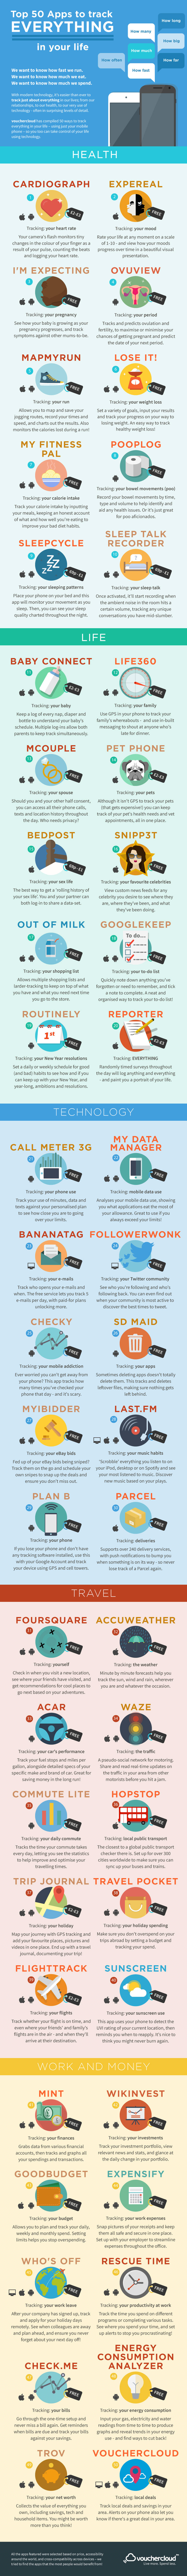 Apps to track everything infographic